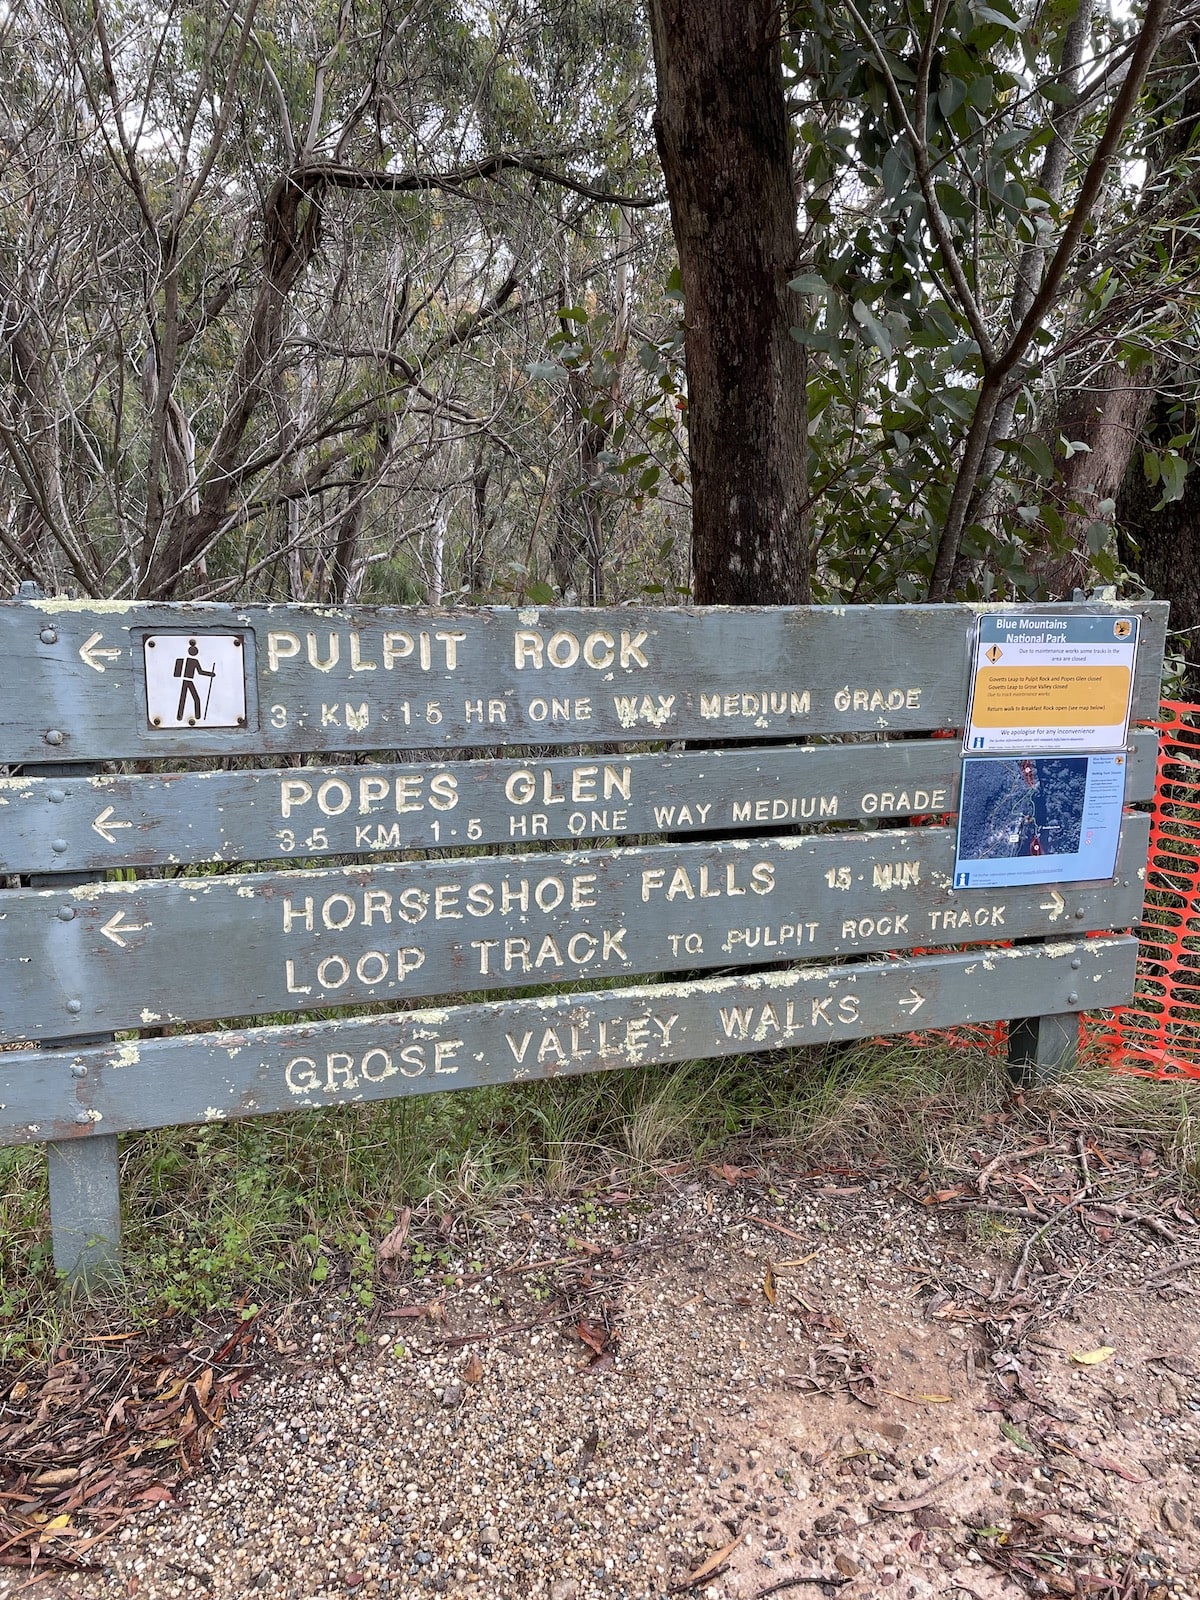 A wooden signpost showing some hiking trails, with a laminated card attached to part of the signpost, and some orange netting to the right, indicating that the area is undergoing maintenance.